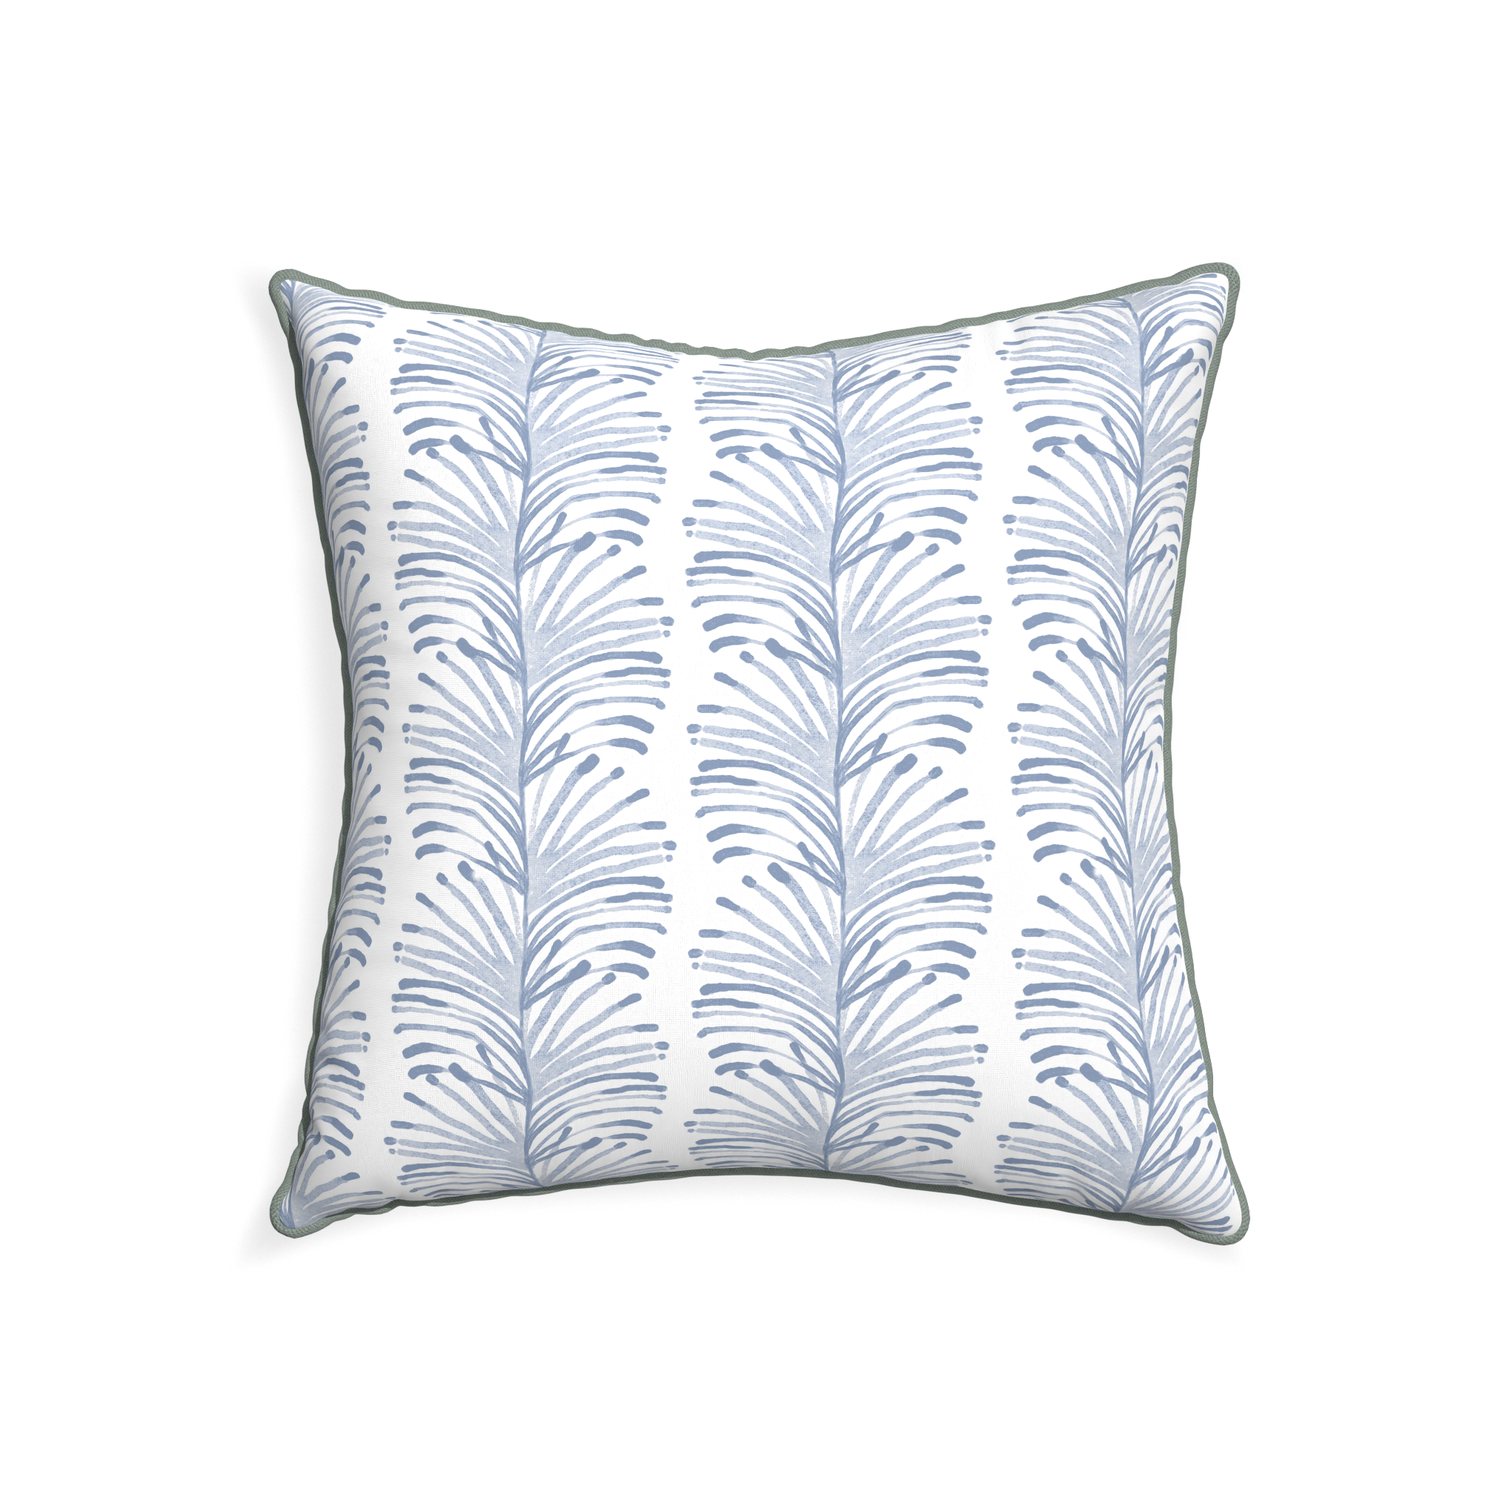 22-square emma sky custom sky blue botanical stripepillow with sage piping on white background